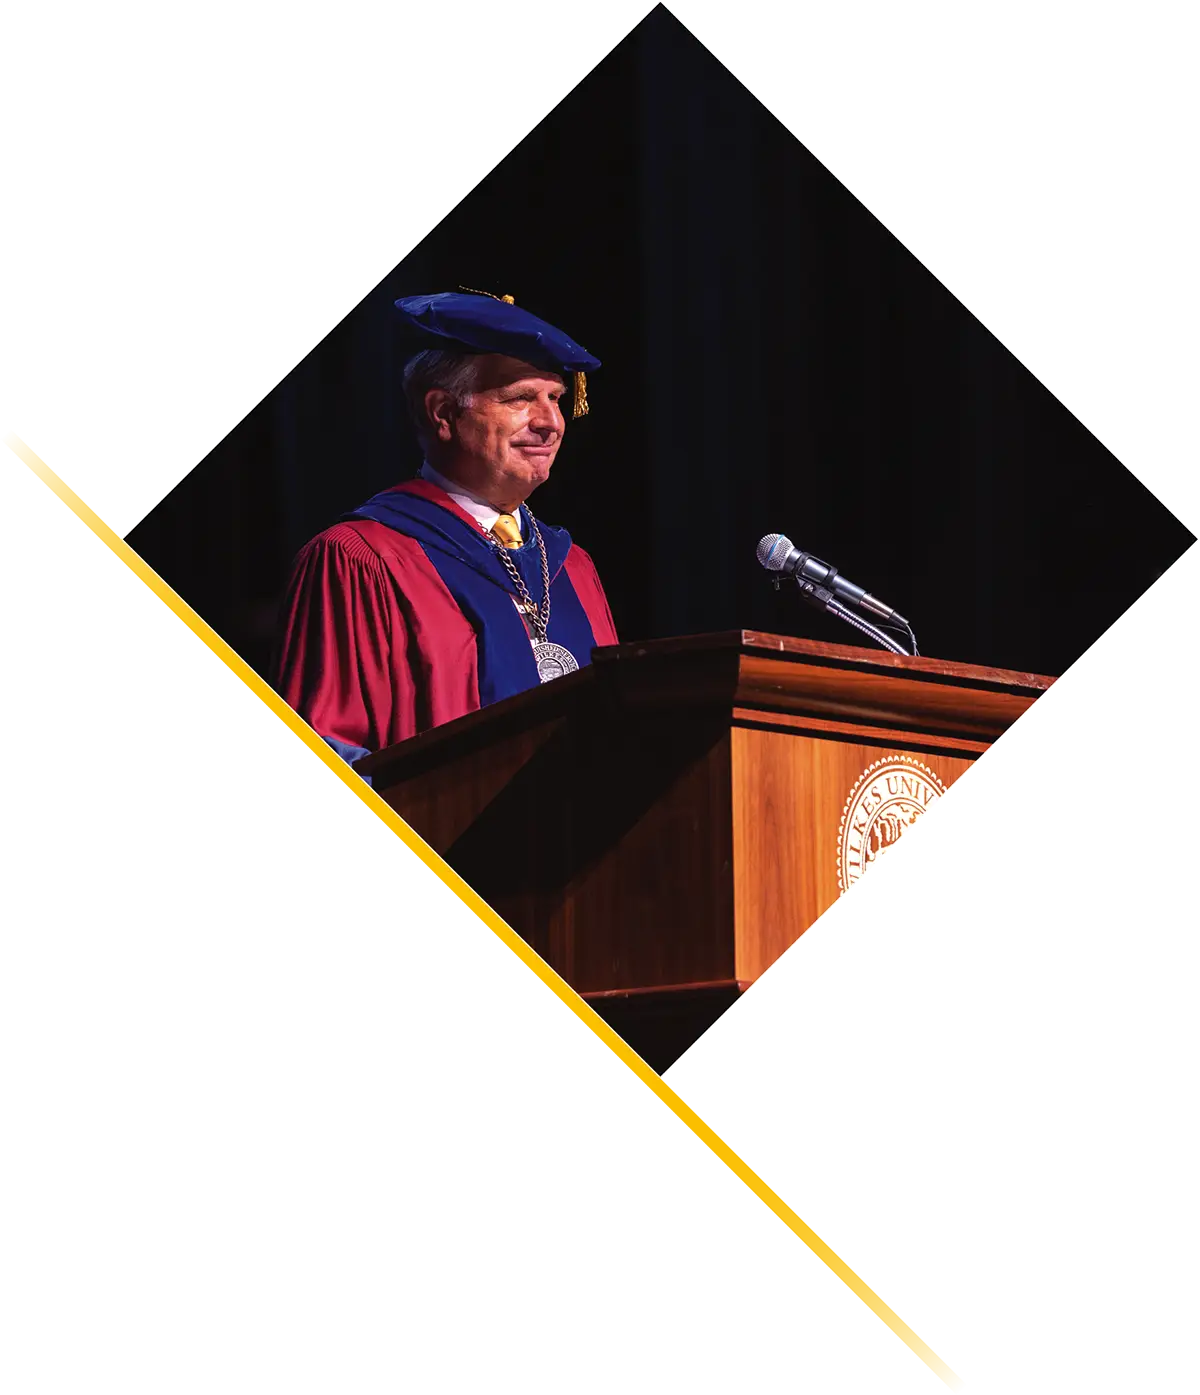 Paul Adams speaking at a commencement ceremony